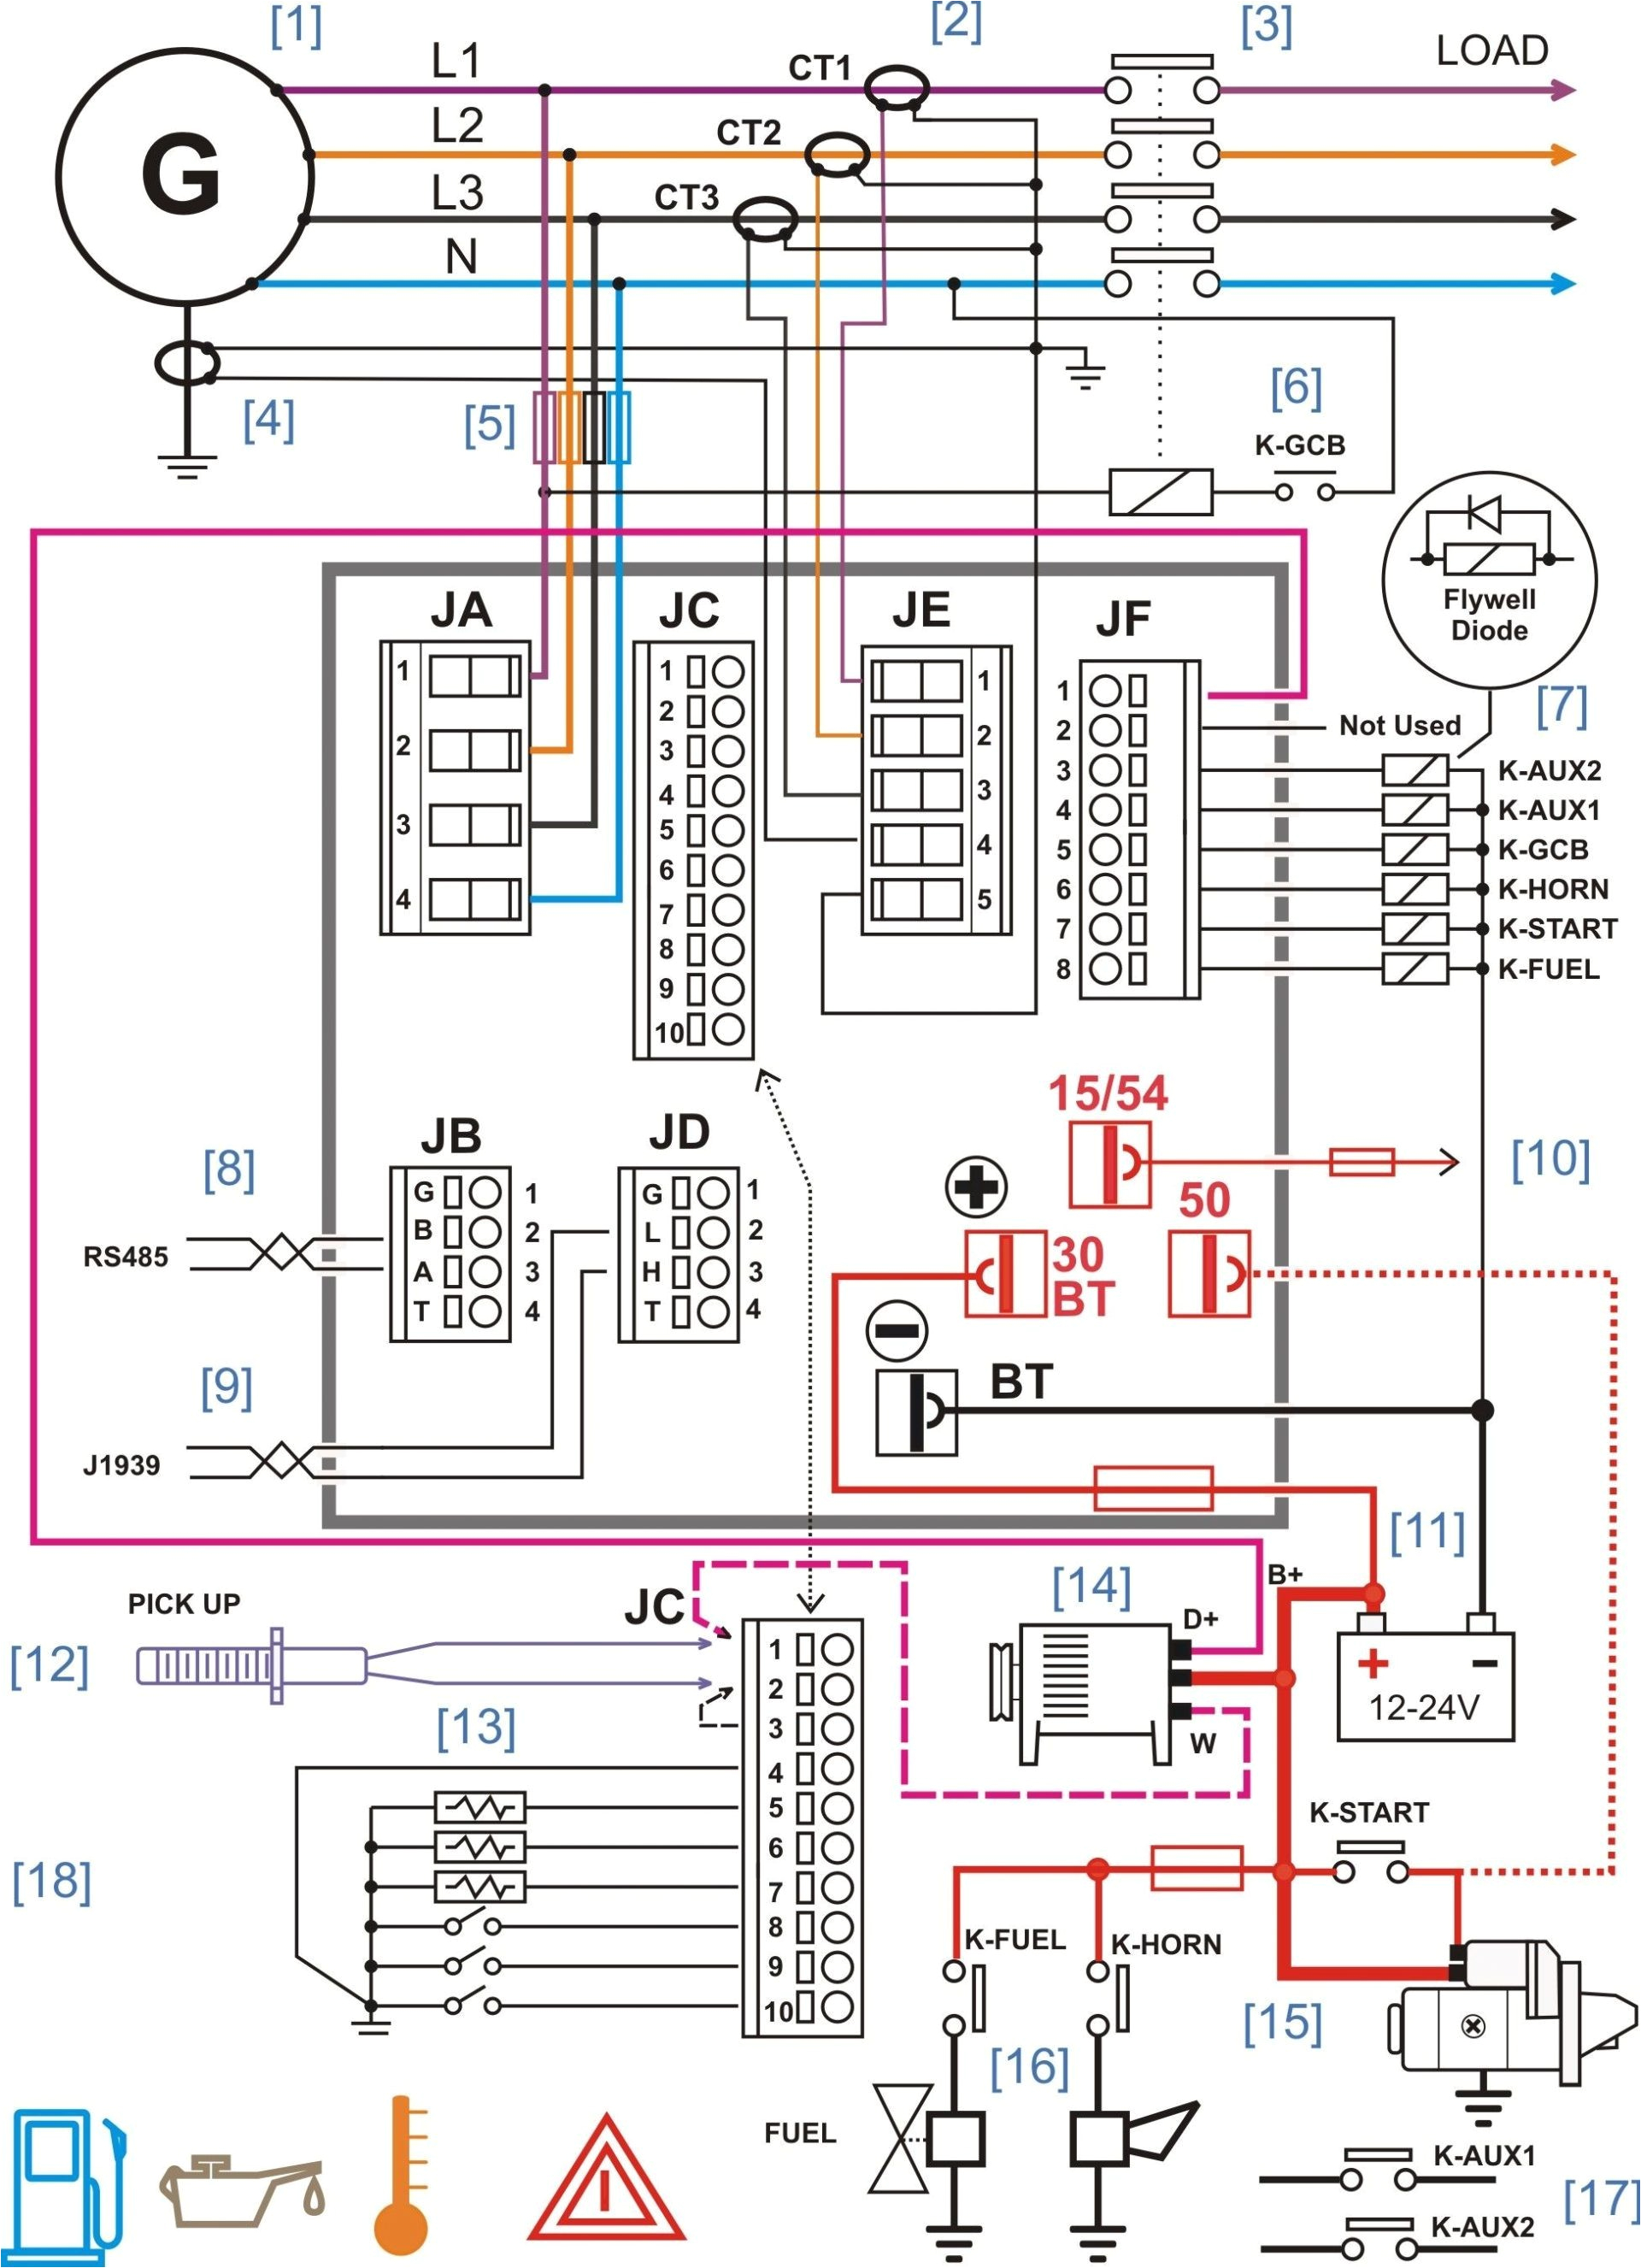 rv distribution panel wiring diagram a board valid for new electrical 14n with marine generator